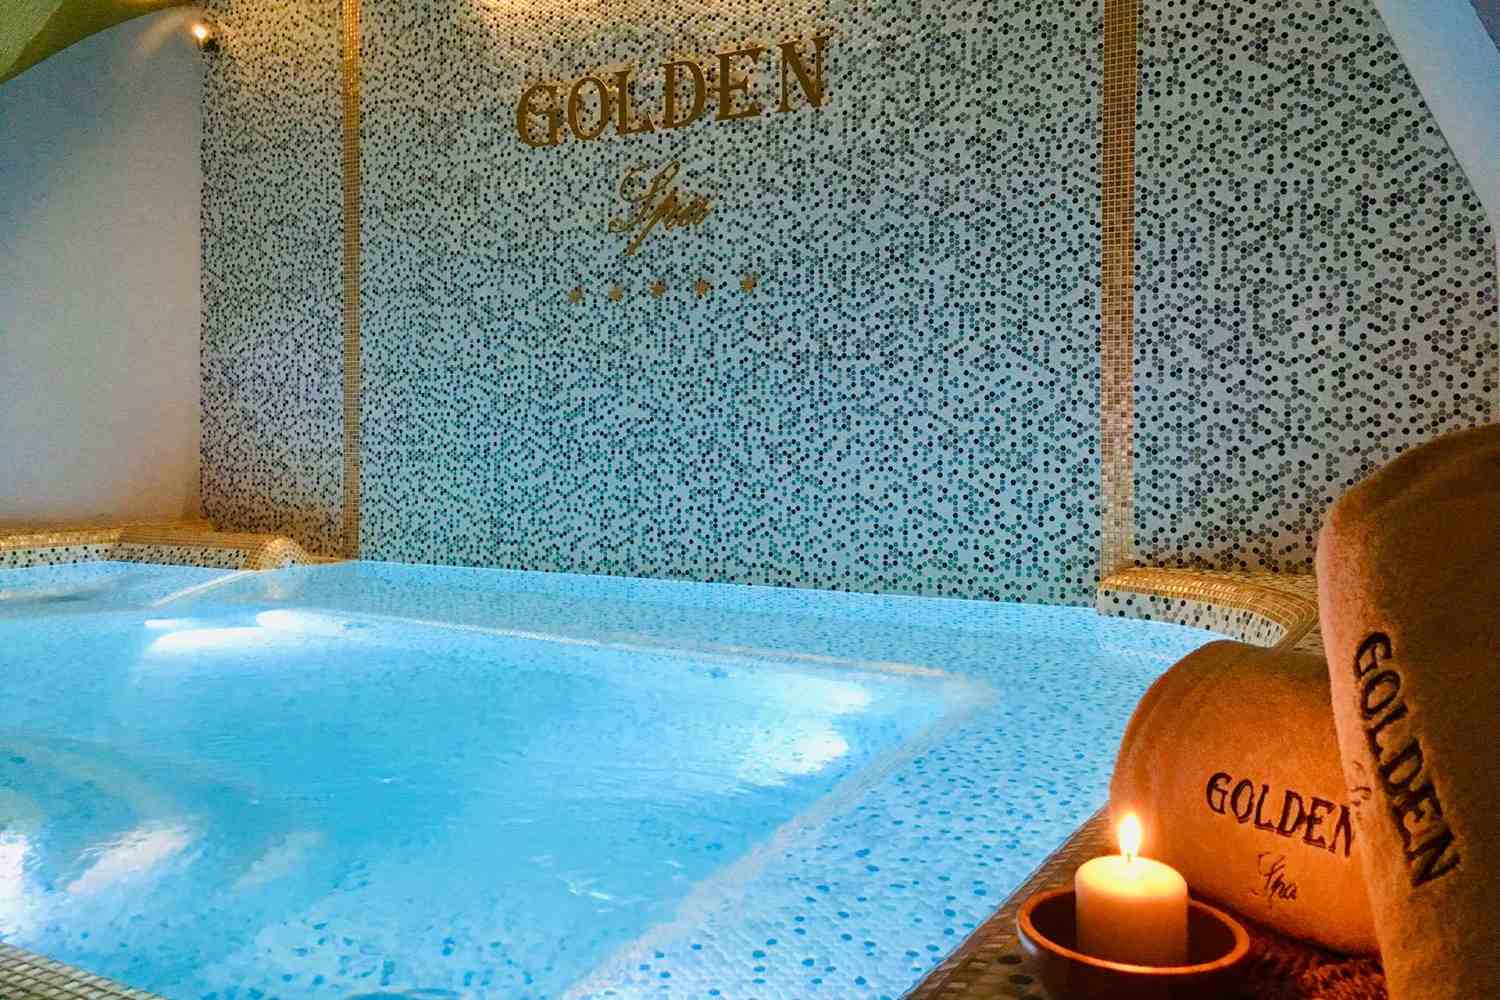 Golden Tower Hotel & Spa Florence, Tuscany - Italy